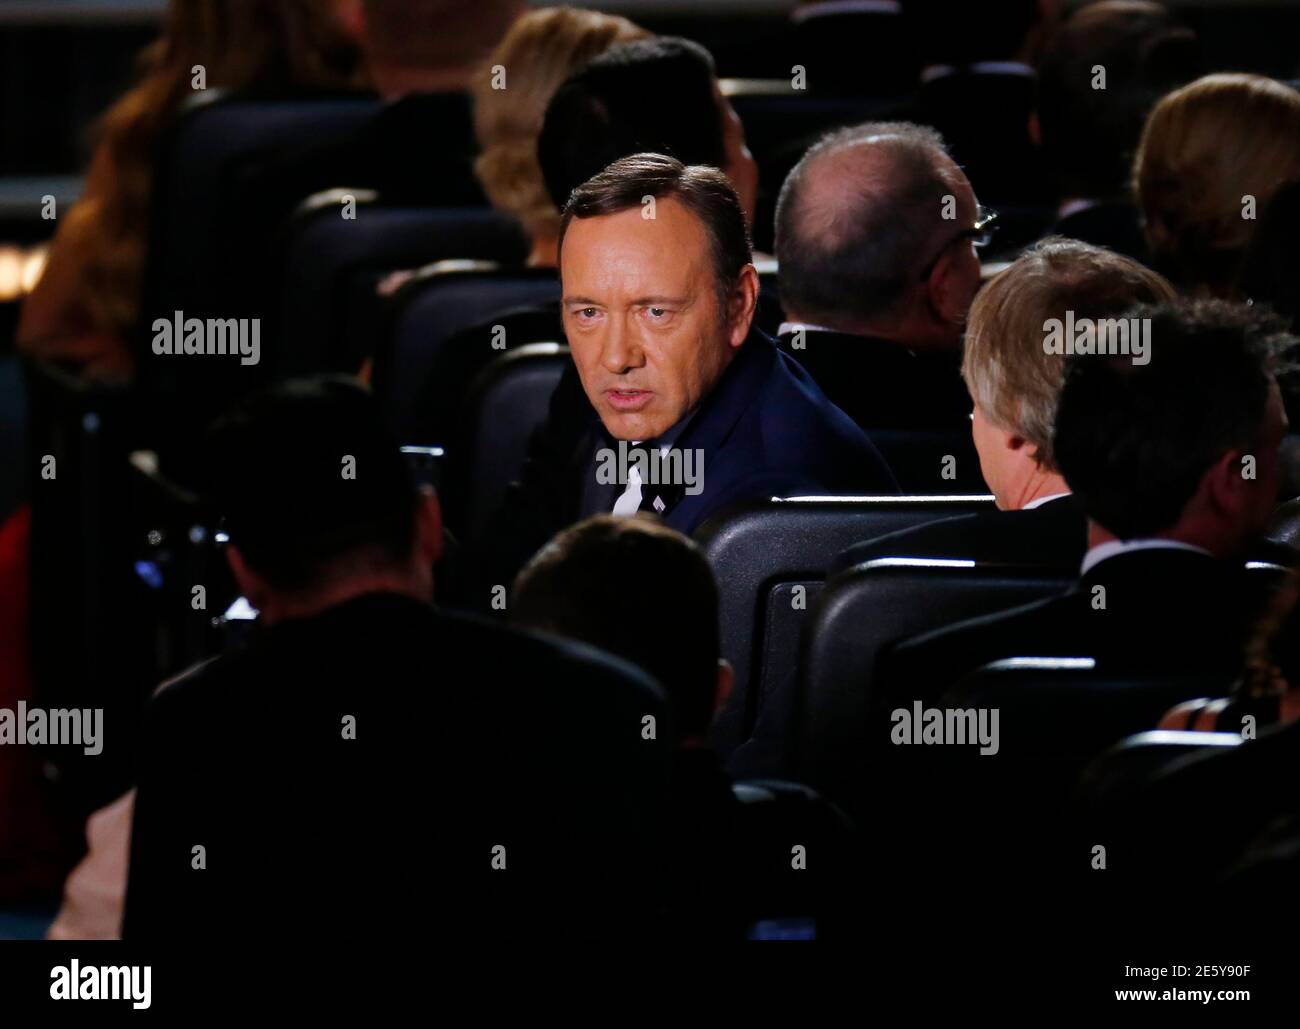 Actor Kevin Spacey peforms a cutaway scene during the opening act at the 65th Primetime Emmy Awards in Los Angeles September 22, 2013.   REUTERS/Mike Blake (UNITED STATES  - Tags: ENTERTAINMENT)  (EMMYS-SHOW) Stock Photo